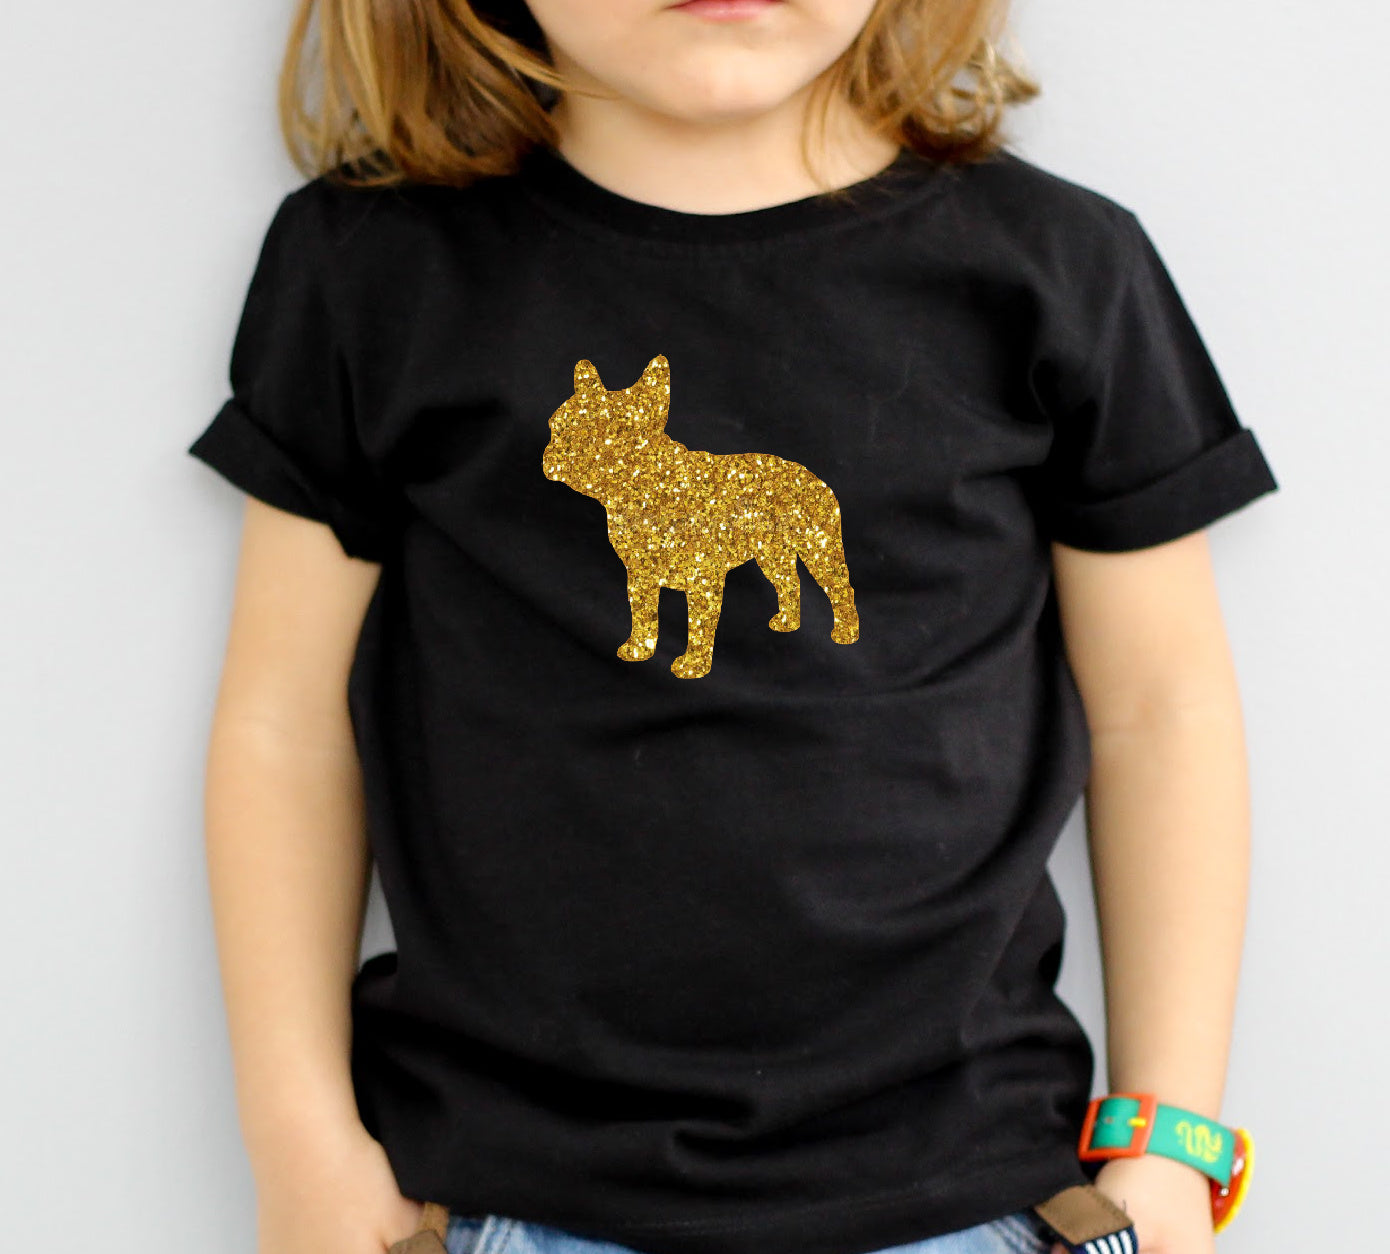 Dog T-Shirt for Children - Personalise with ANY Dog Breed